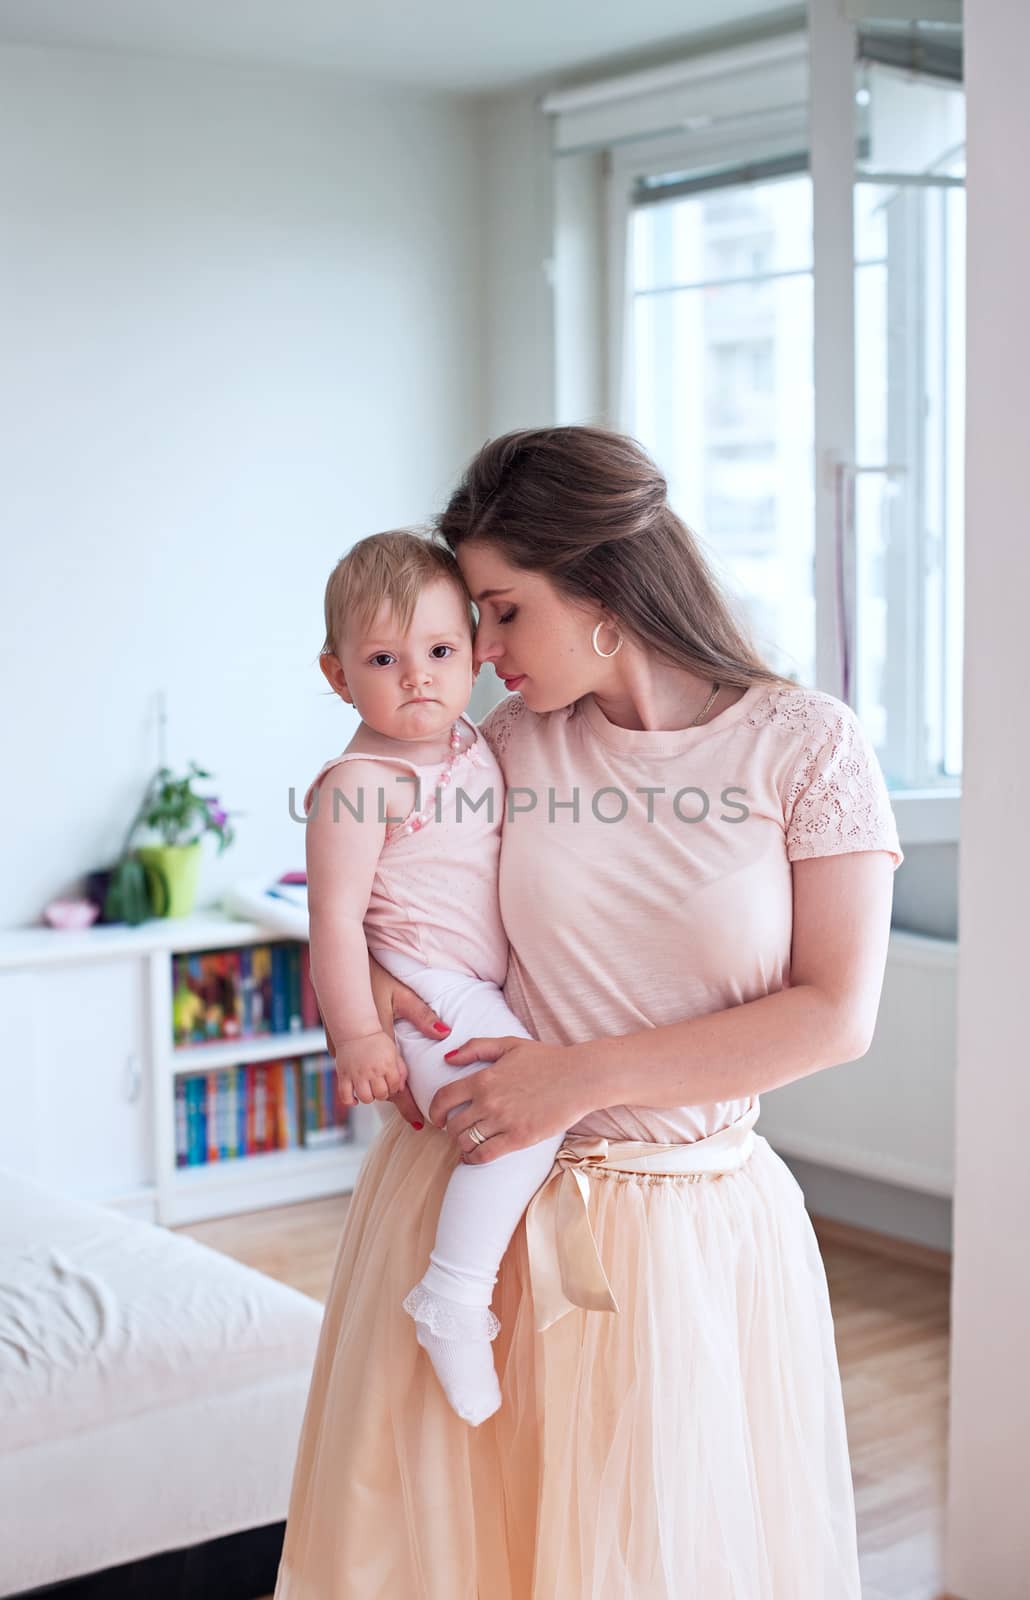 Family, child and parenthood concept - happy mother with her baby